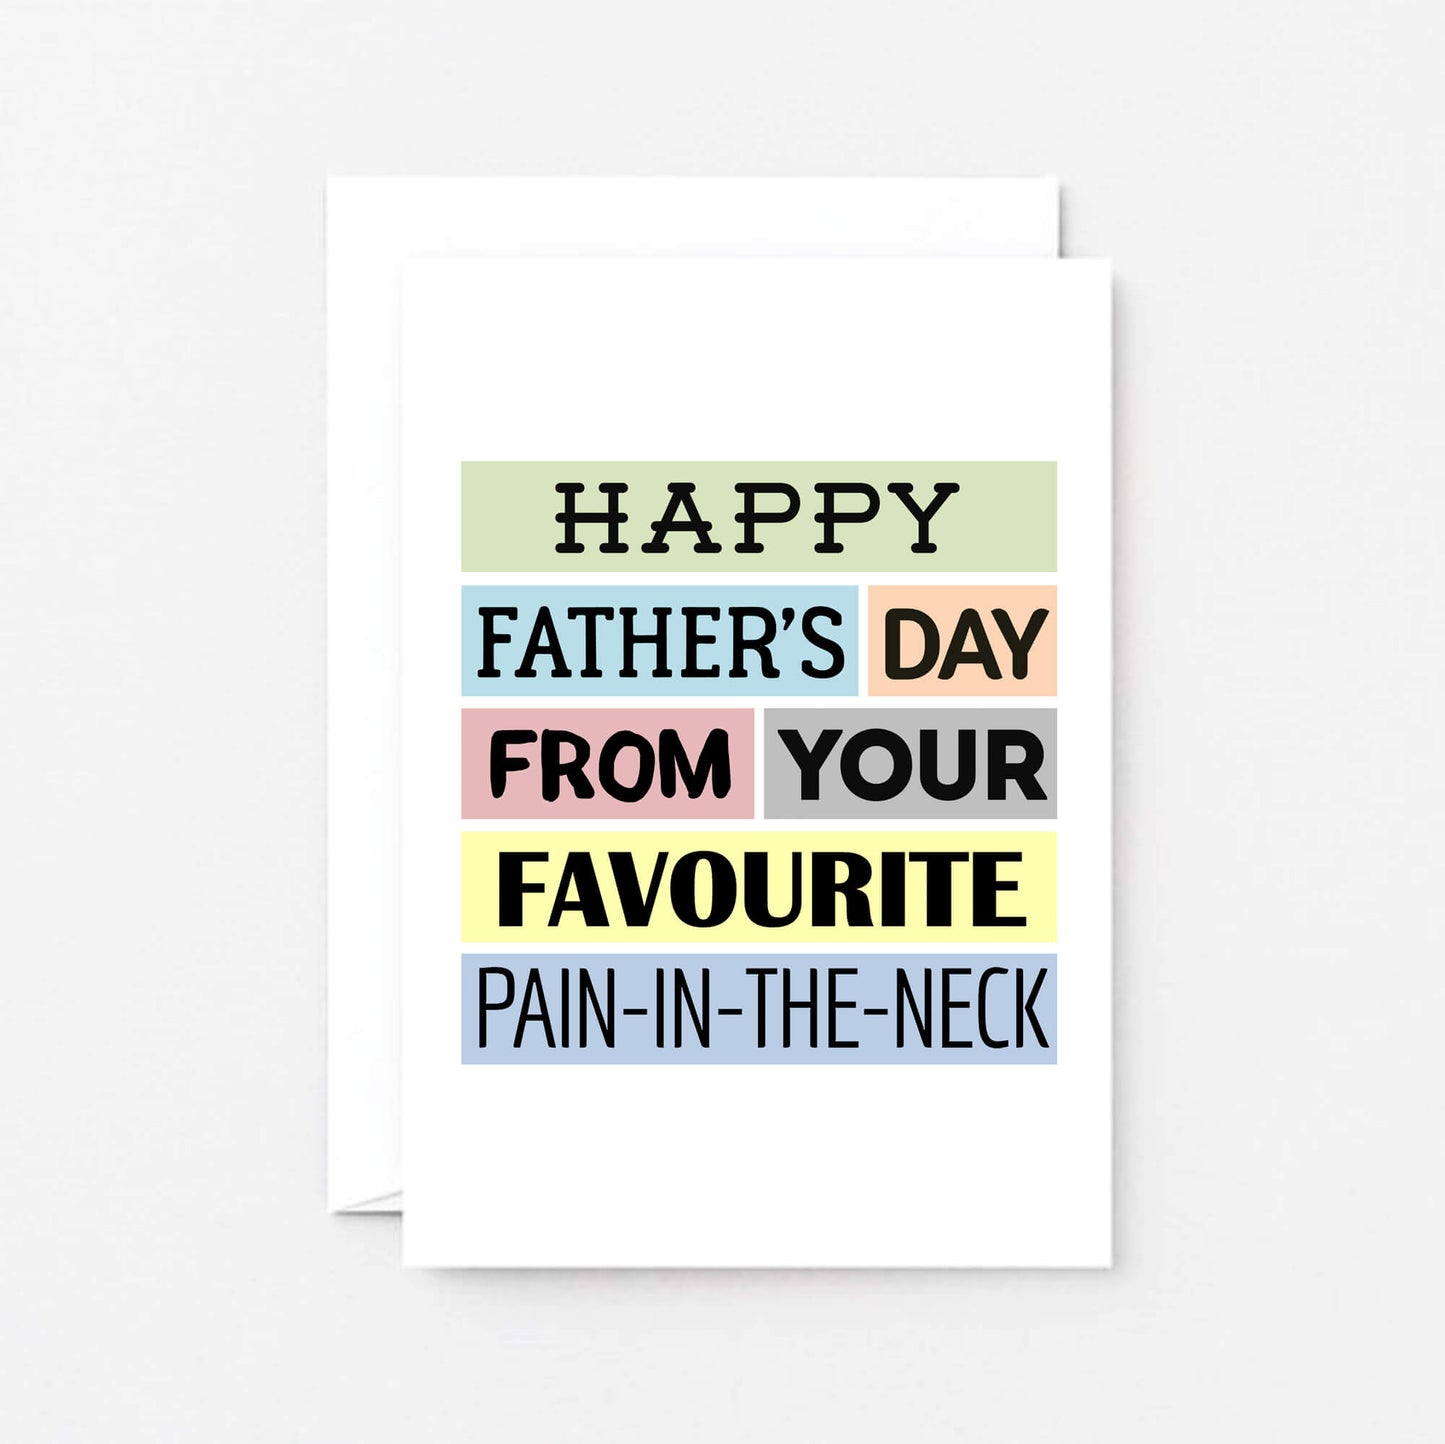 Father's Day Card by SixElevenCreations. Reads Happy Father's Day from your favourite pain-in-the-neck. Product Code SEF0004A6